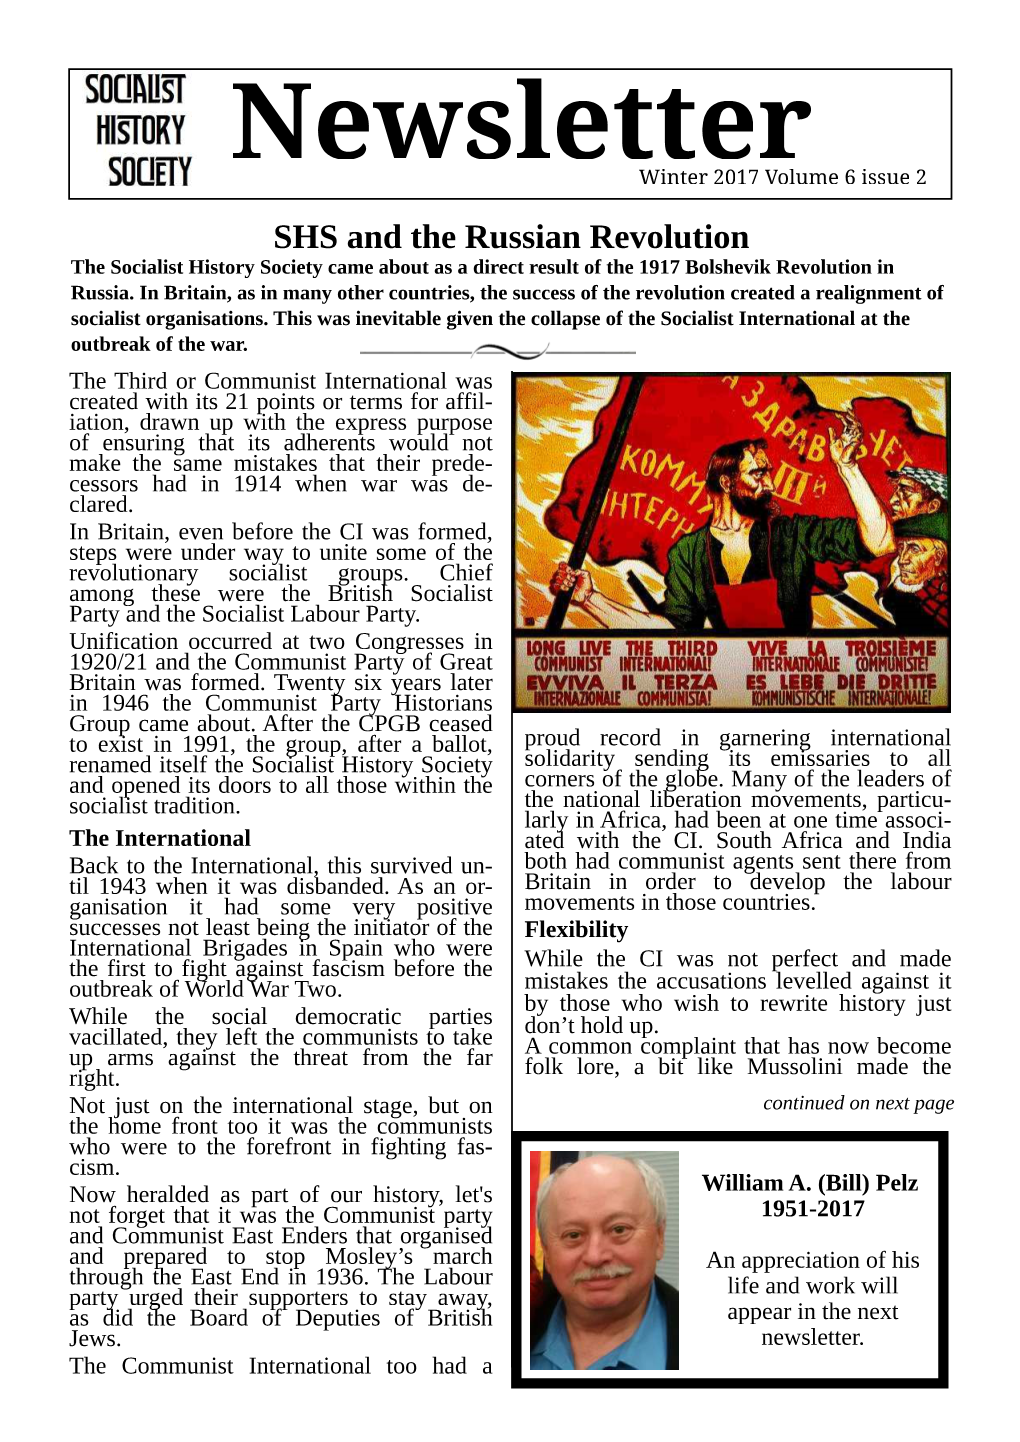 SHS and the Russian Revolution the Socialist History Society Came About As a Direct Result of the 1917 Bolshevik Revolution in Russia